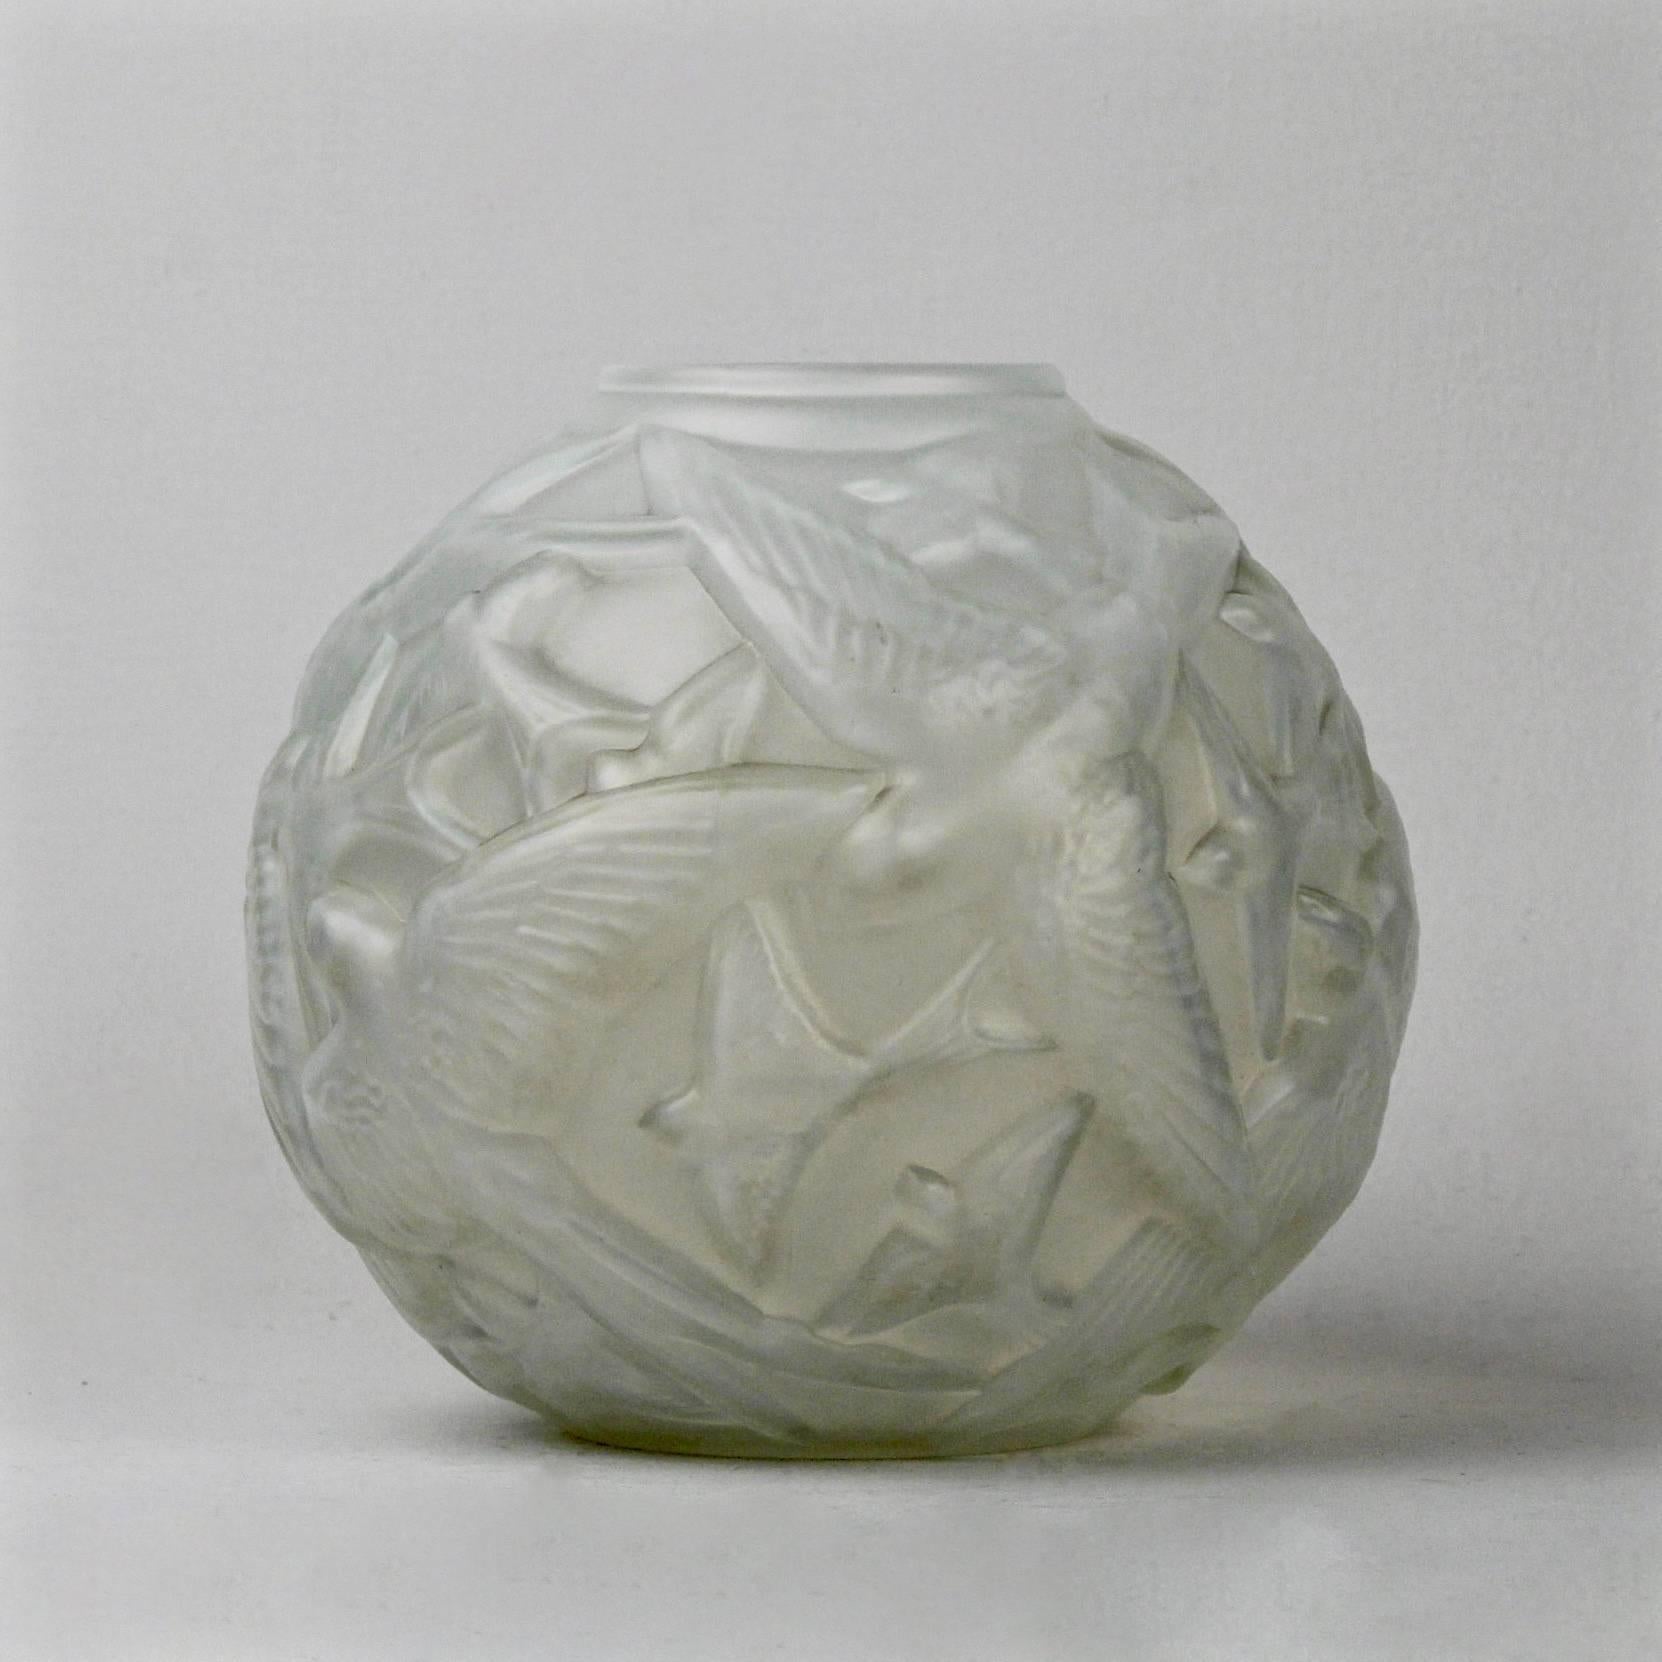 A fine, period French Art Deco opalescent art glass vase. The molded decoration depicts birds. 

Arrers (a competitor of Lalique) manufactured this vase for the early Retailer Ovington in New York. 

Marked in the mold in one section: Arrers -